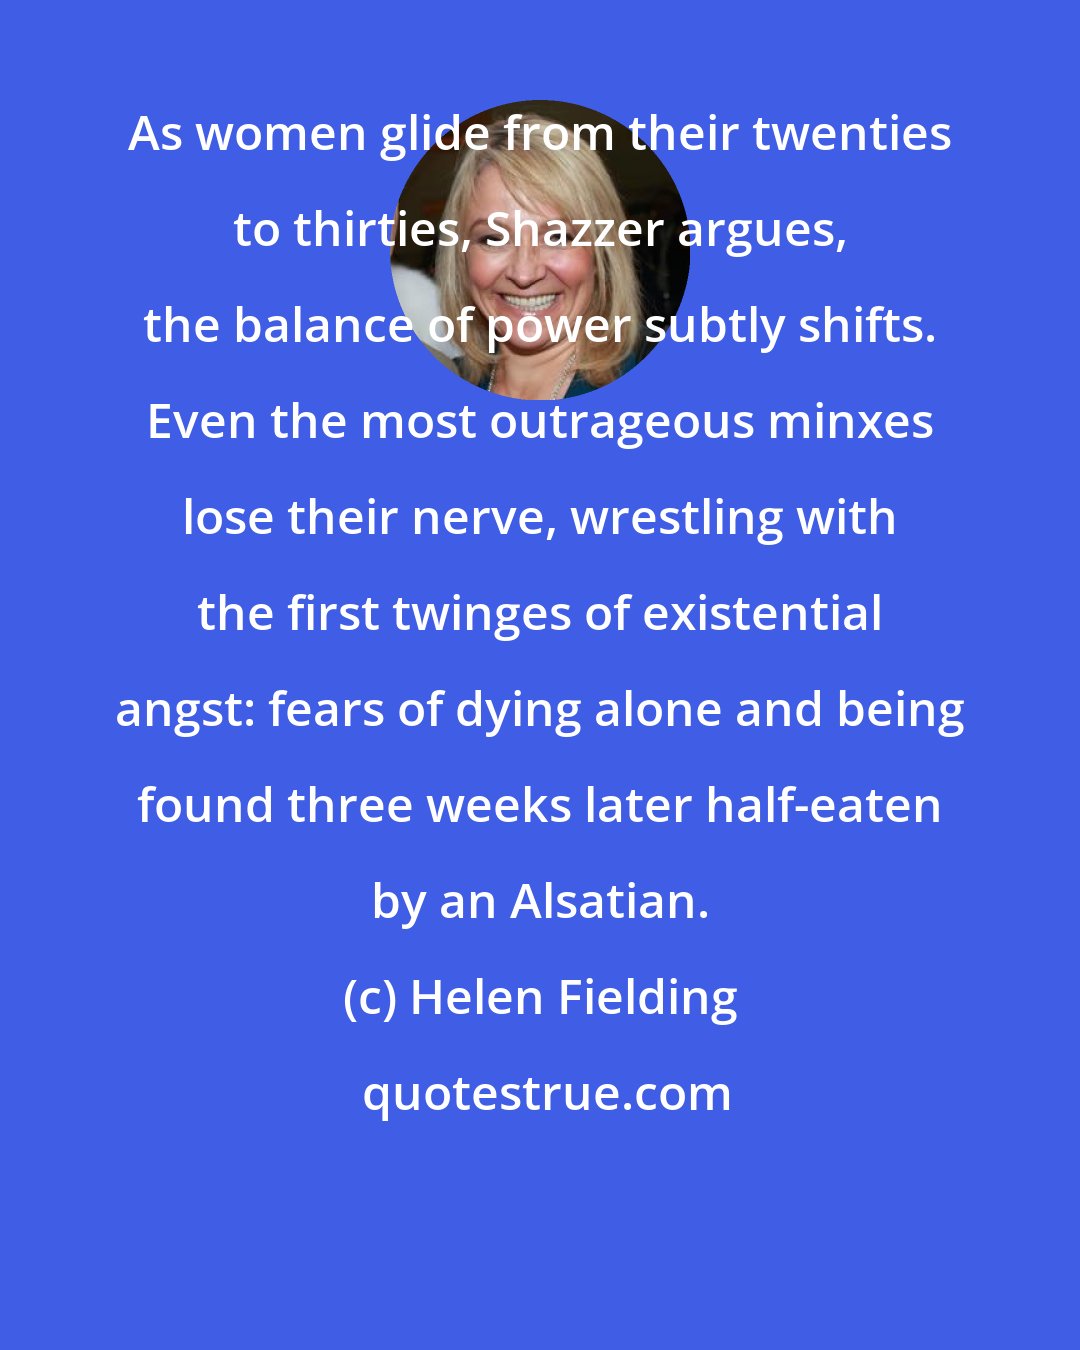 Helen Fielding: As women glide from their twenties to thirties, Shazzer argues, the balance of power subtly shifts. Even the most outrageous minxes lose their nerve, wrestling with the first twinges of existential angst: fears of dying alone and being found three weeks later half-eaten by an Alsatian.